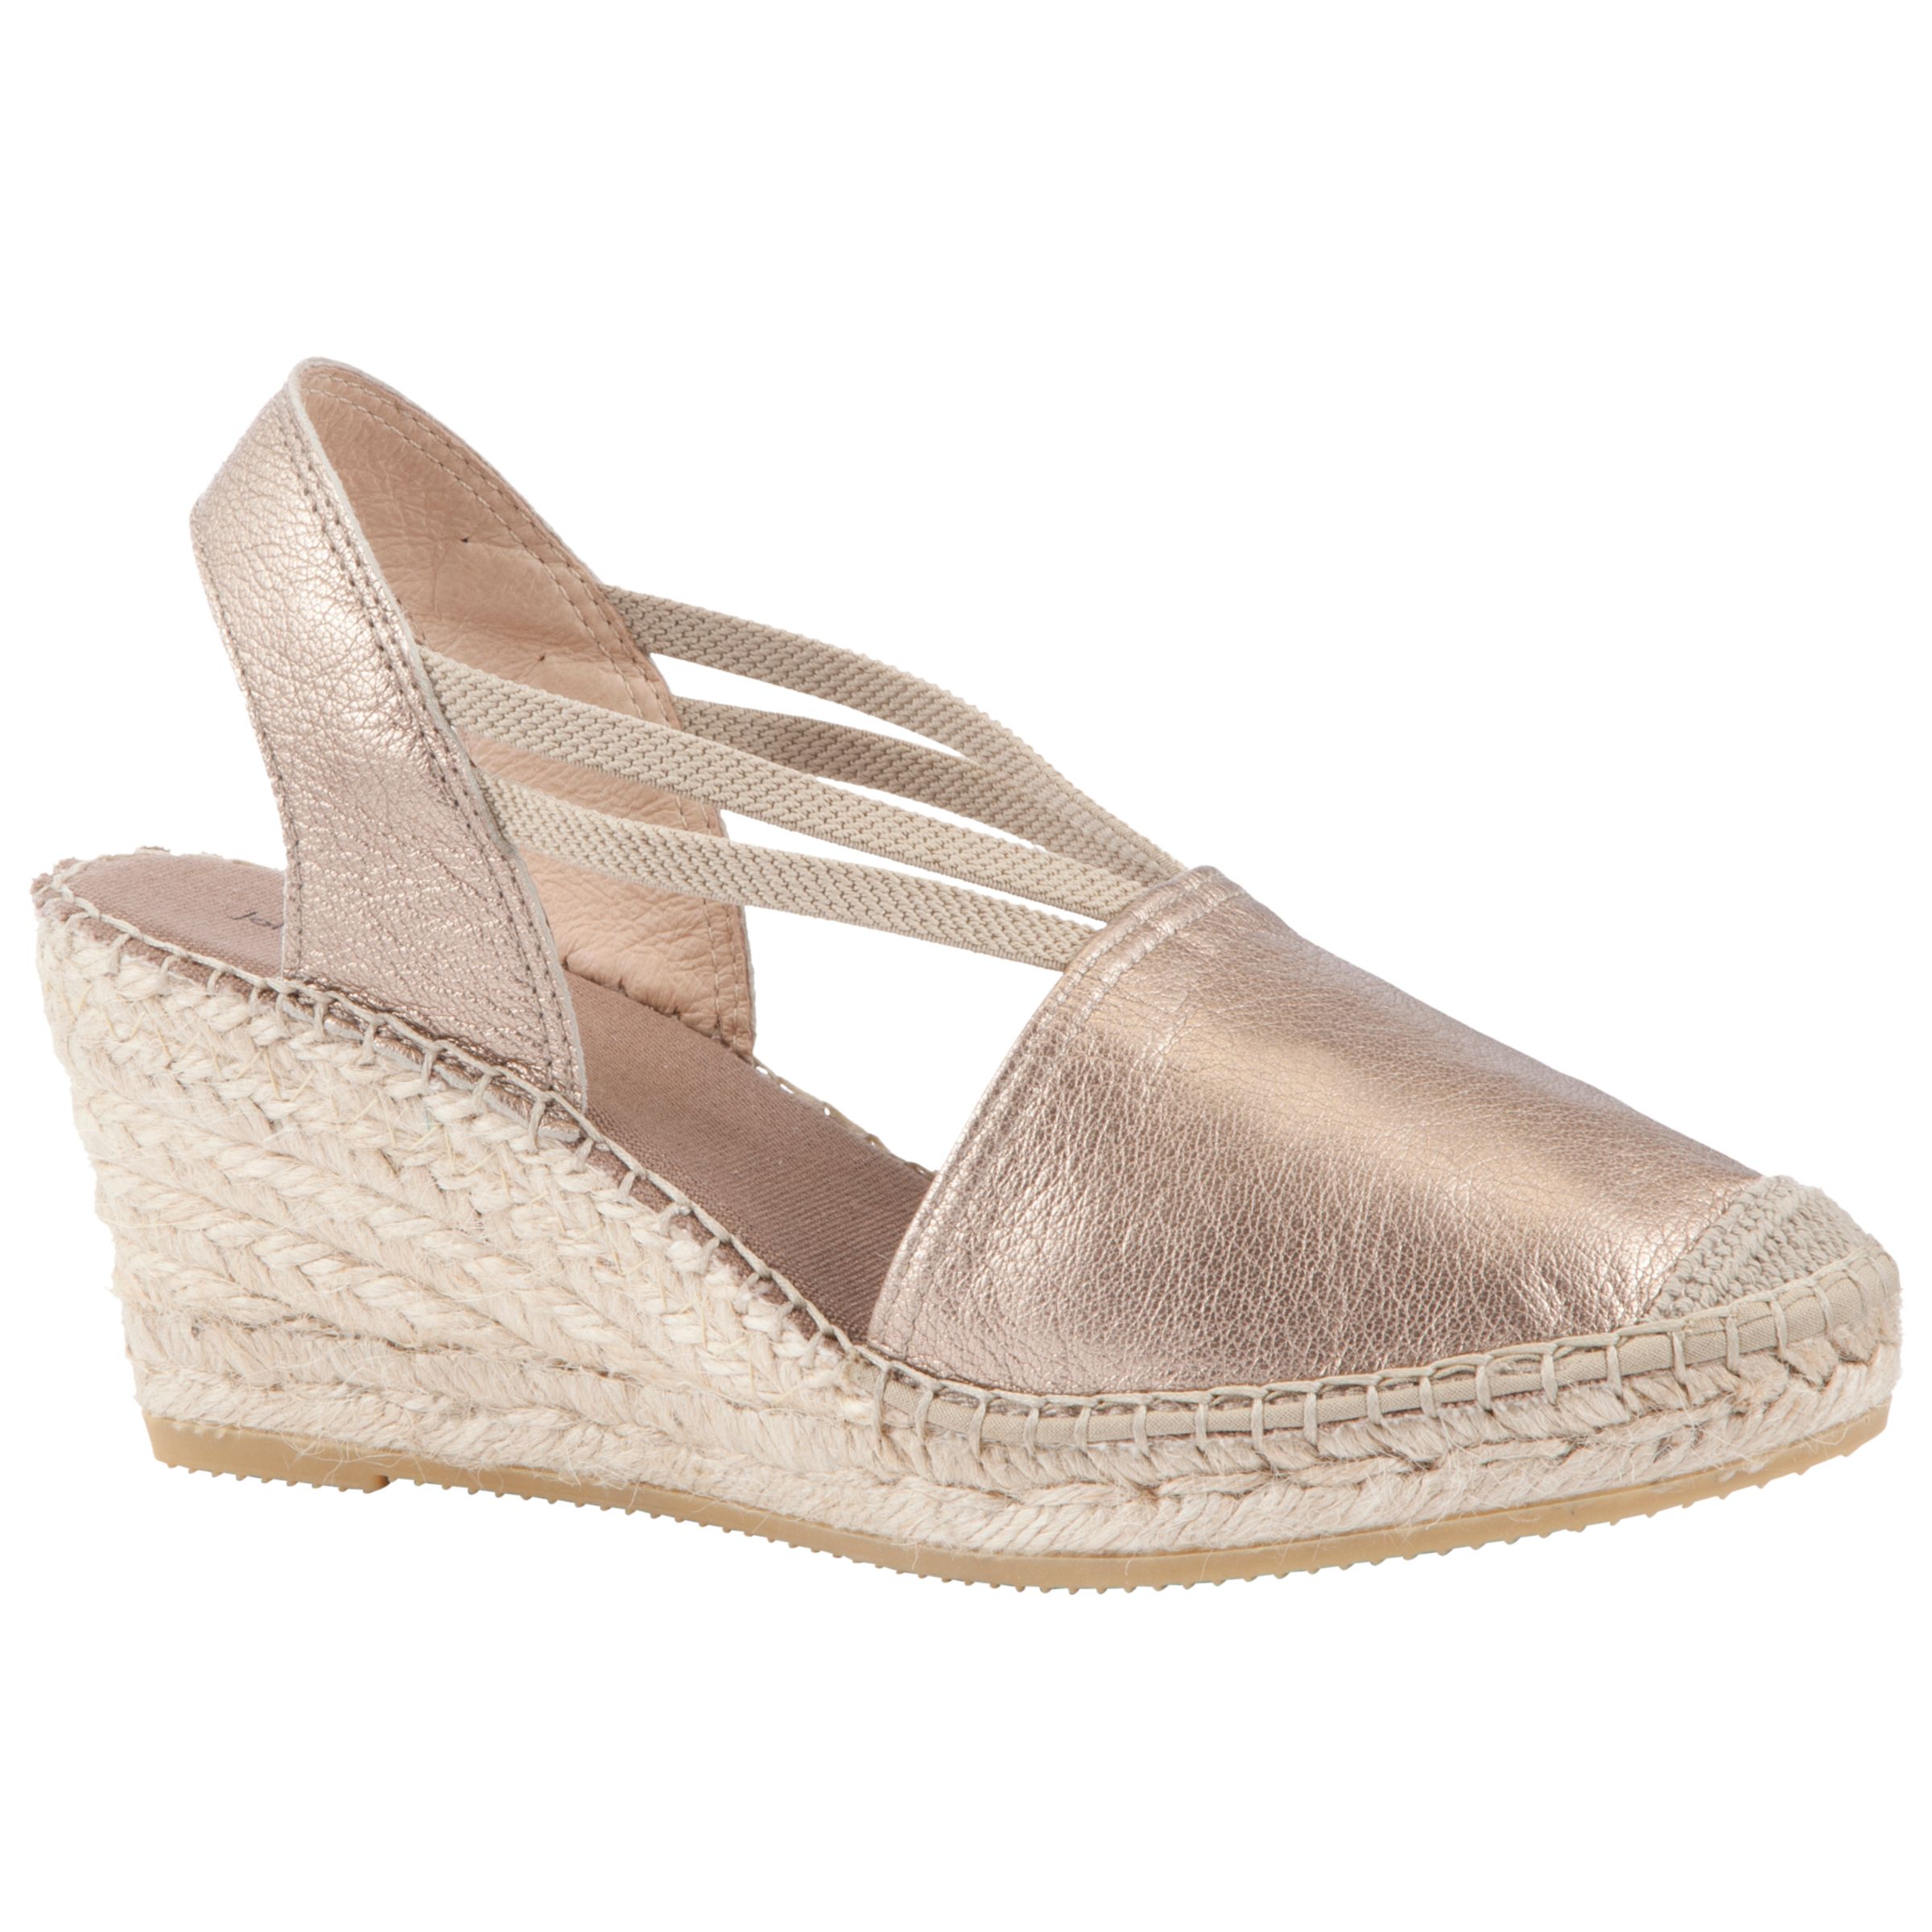 Buy John Lewis Palma Leather Espadrille Wedge Sandals, Gold Online at ...